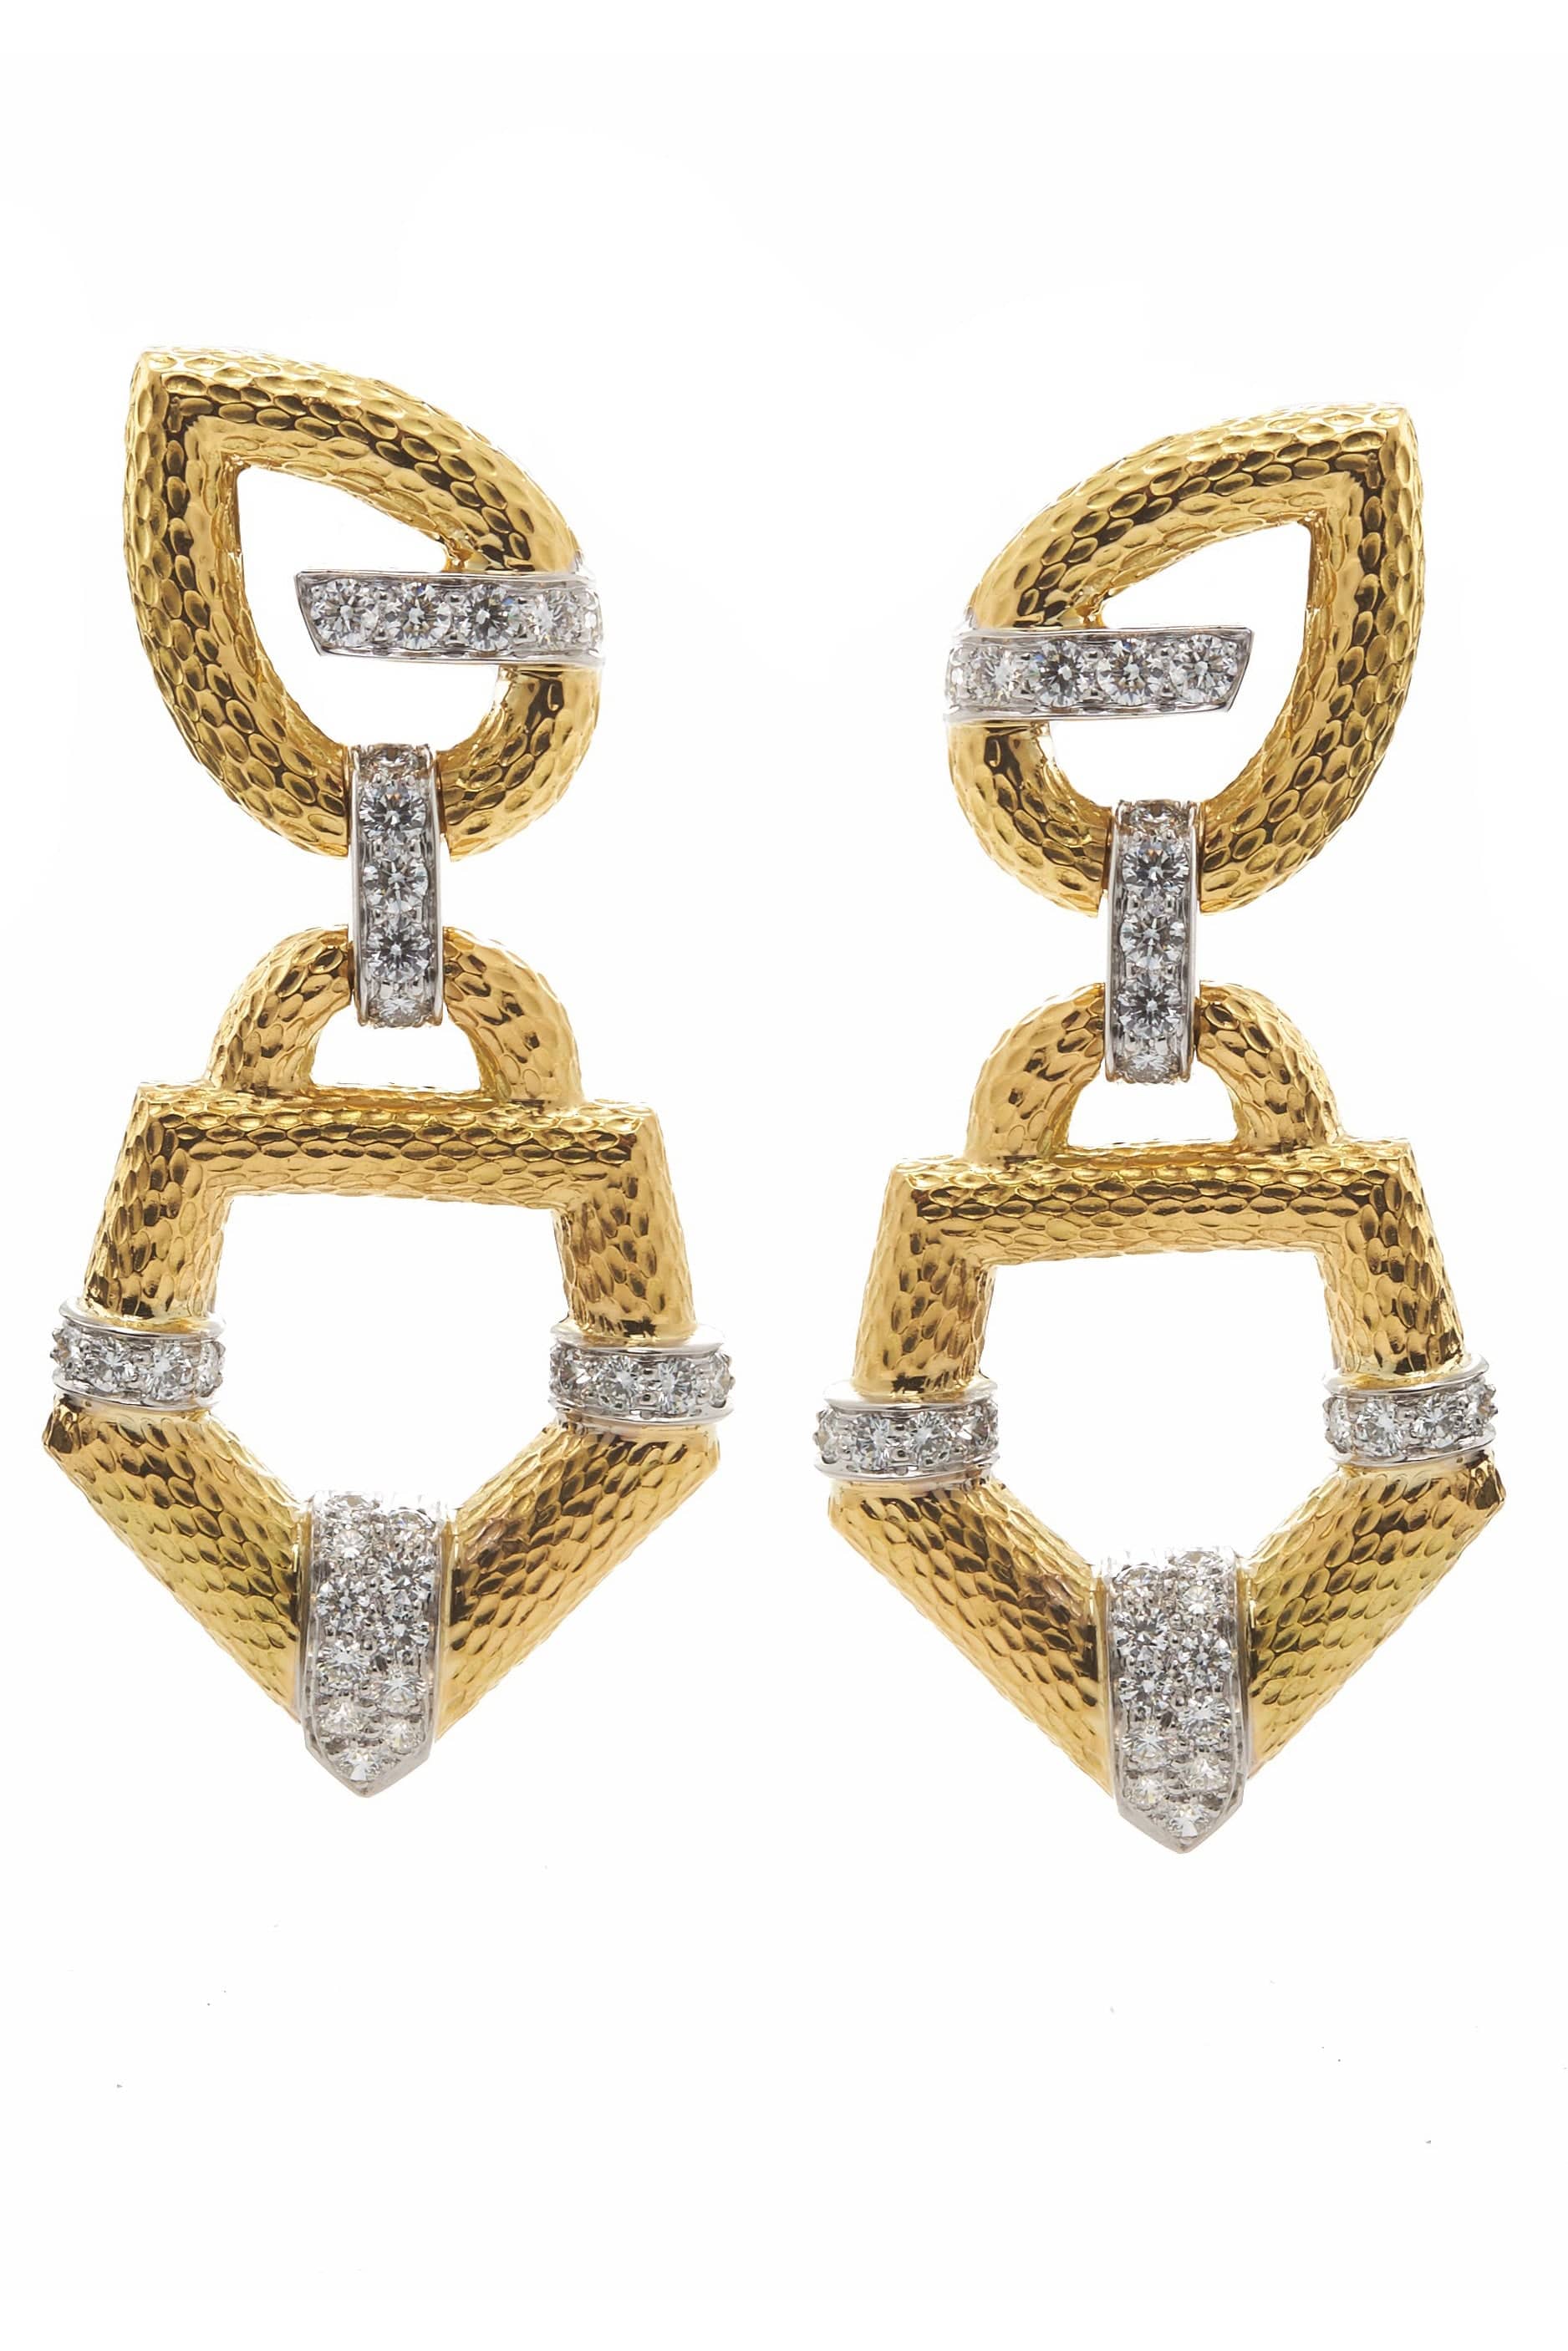 DAVID WEBB-Hammered Gold 57th Street Earrings-YELLOW GOLD